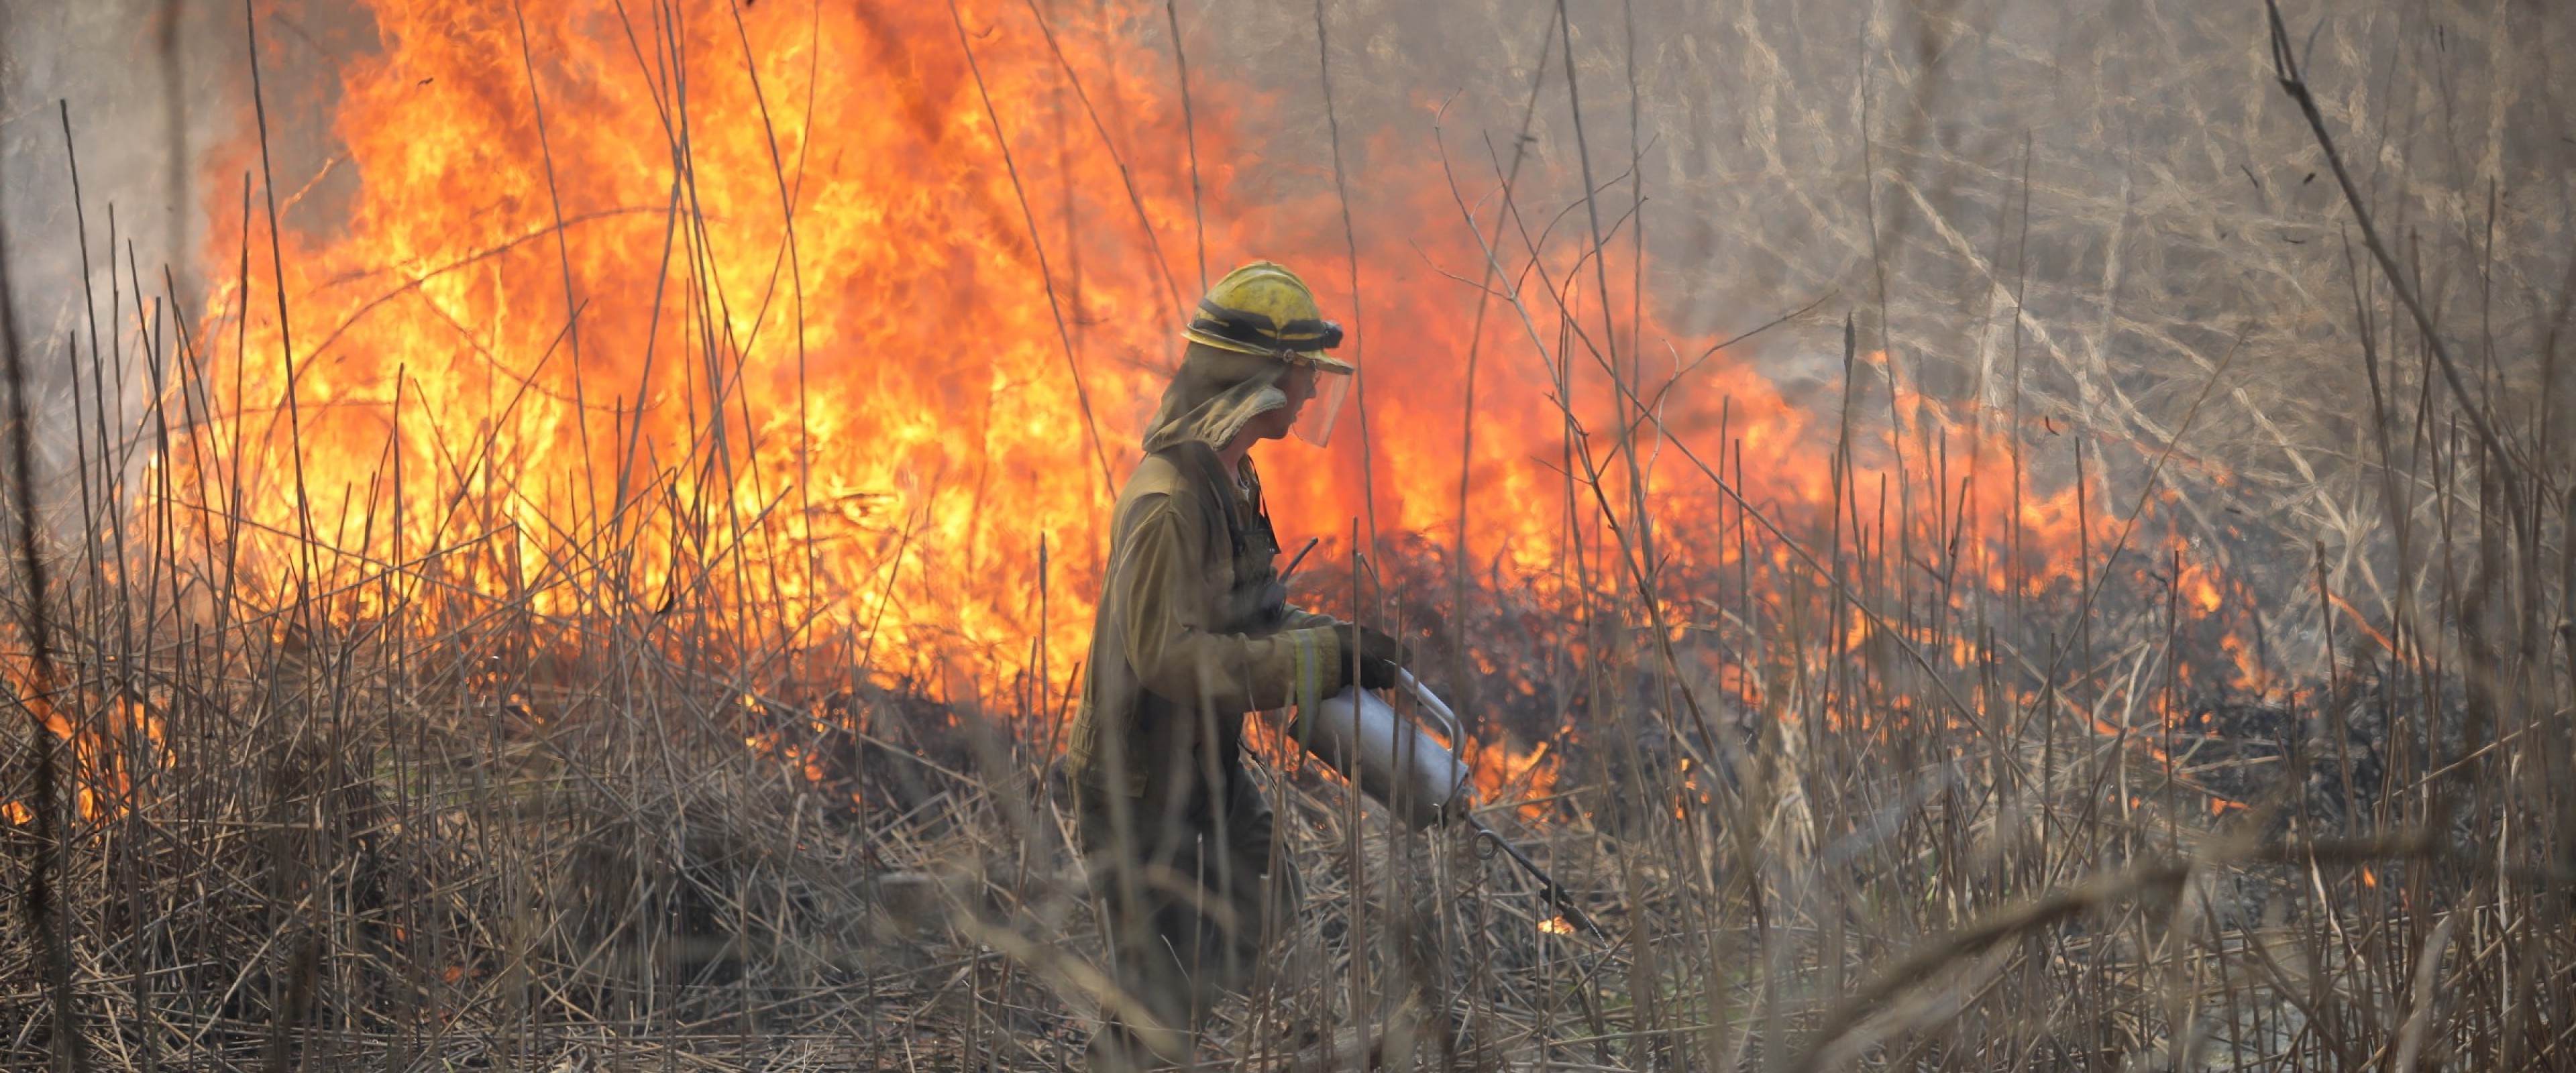 A person putting out a large brush fire